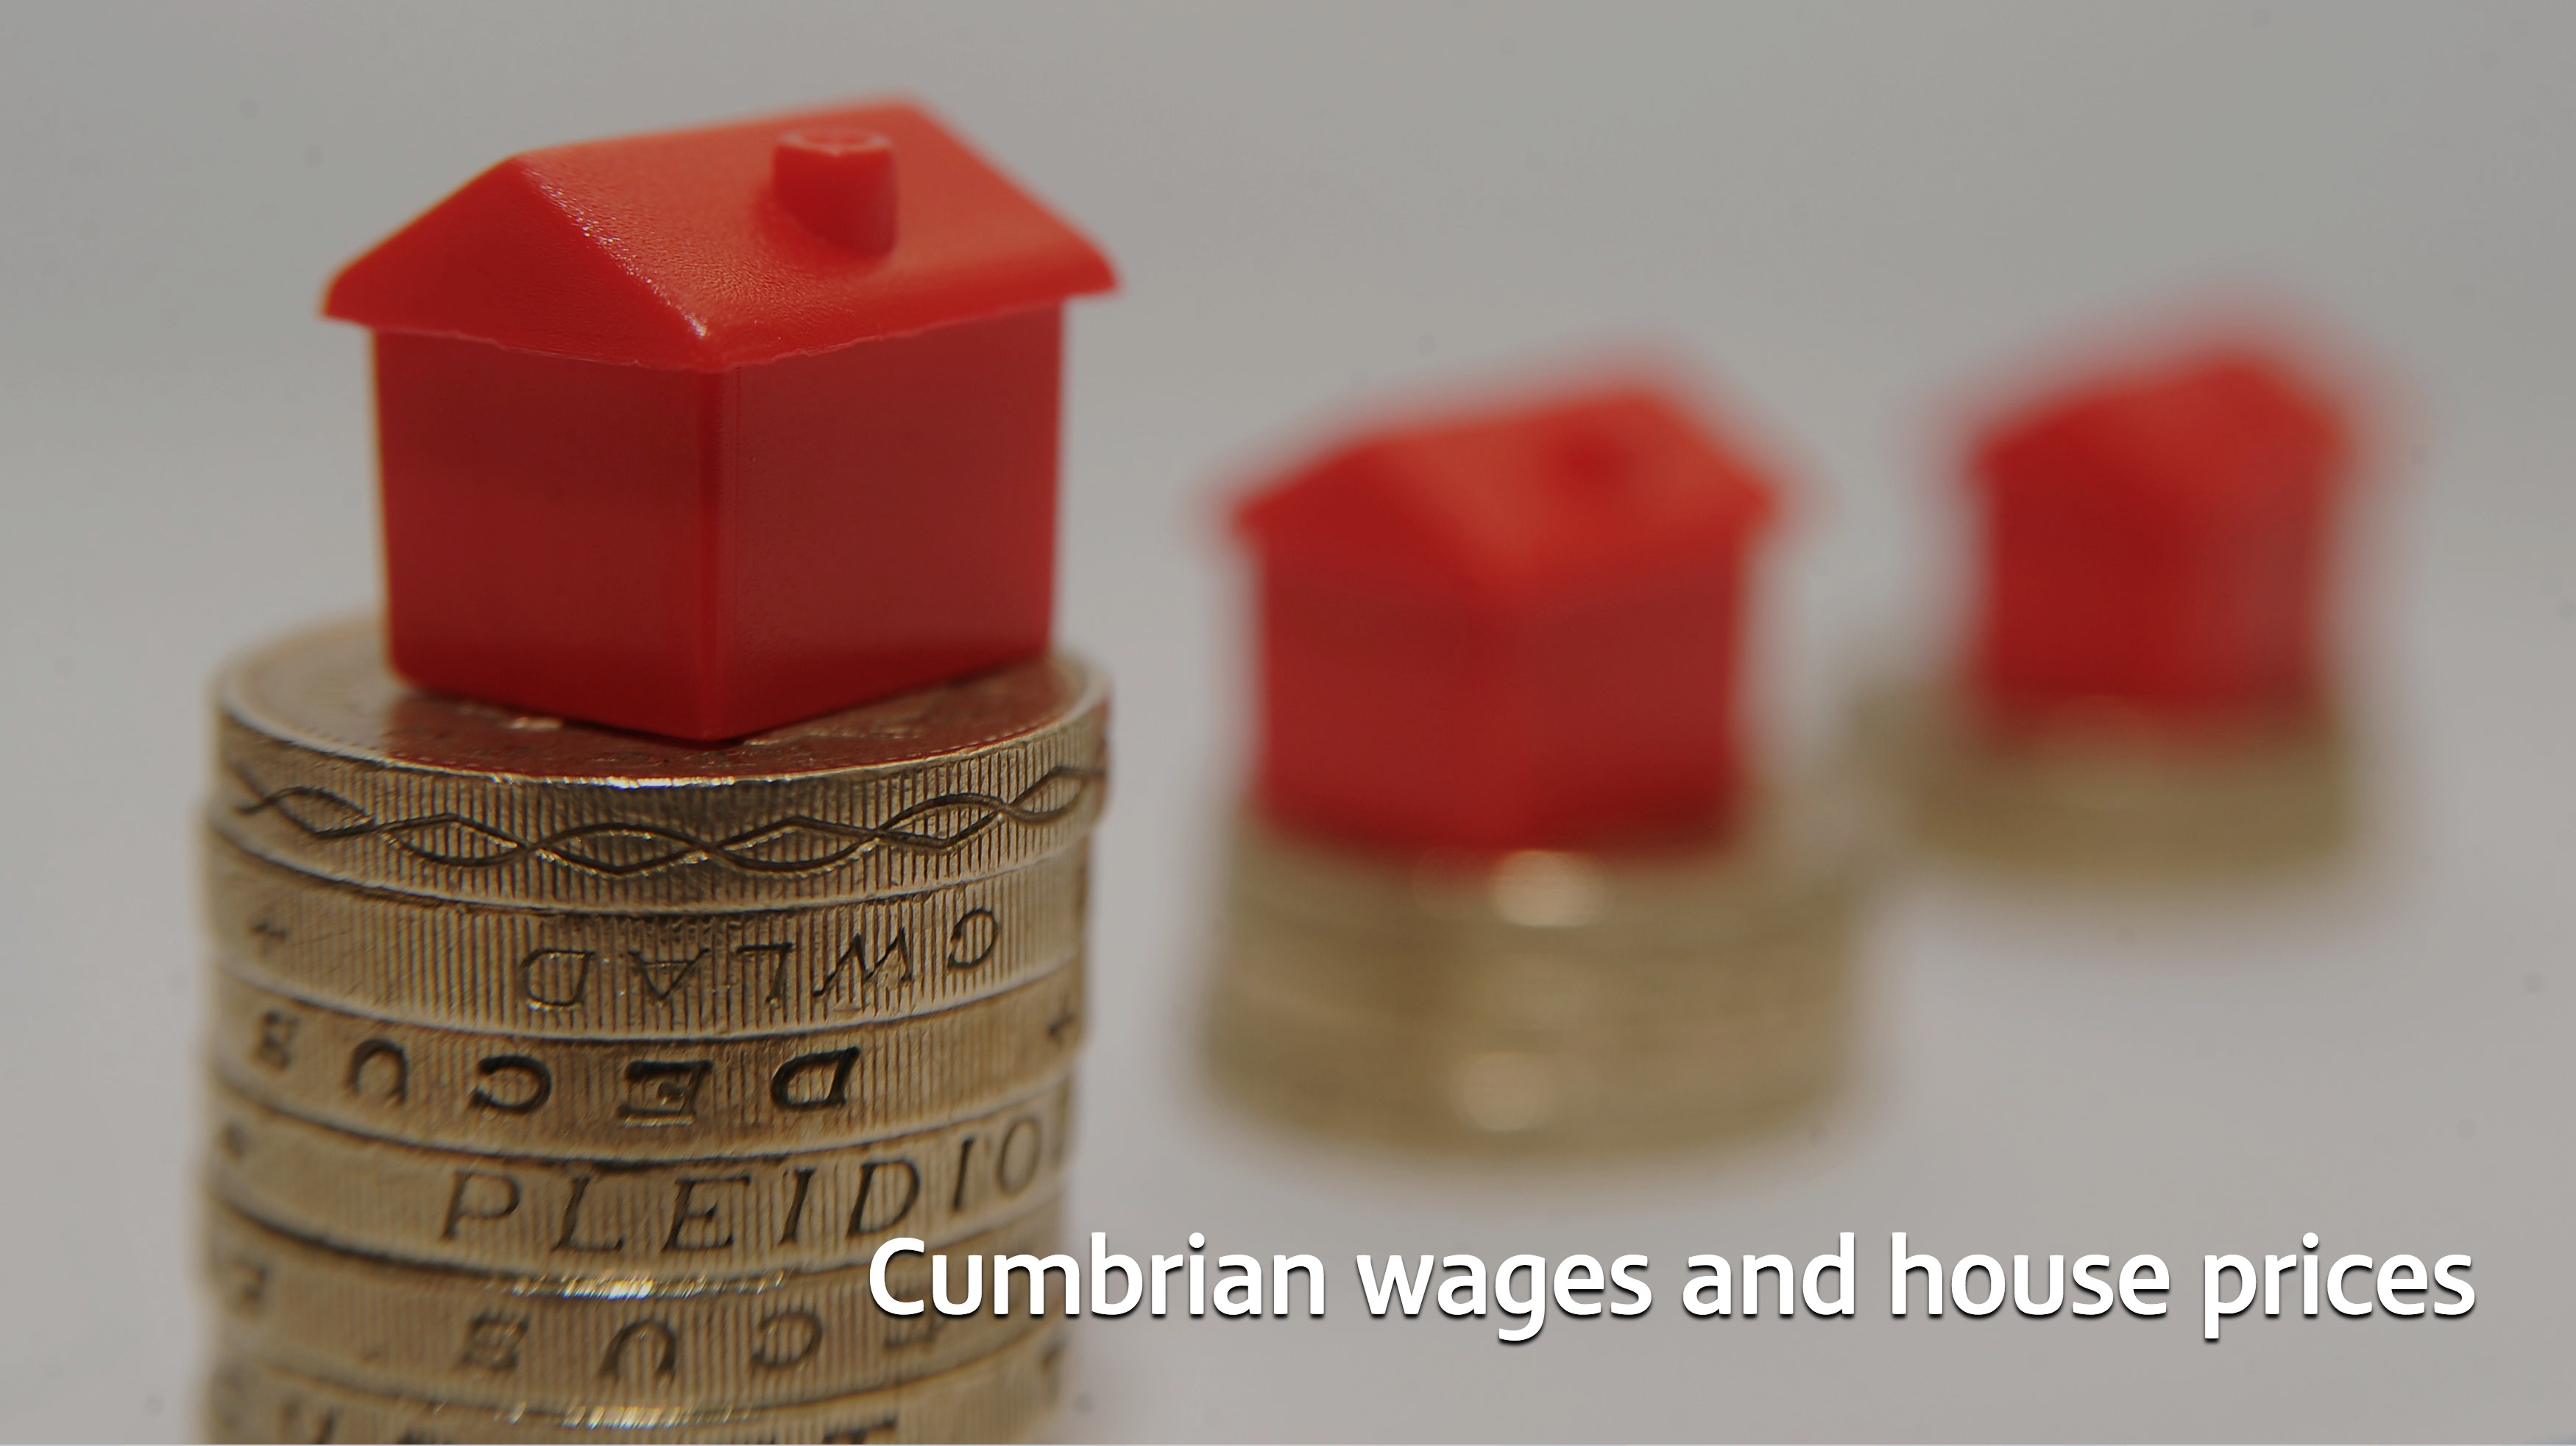 only-those-on-40k-a-year-can-afford-an-average-home-in-cumbria-new